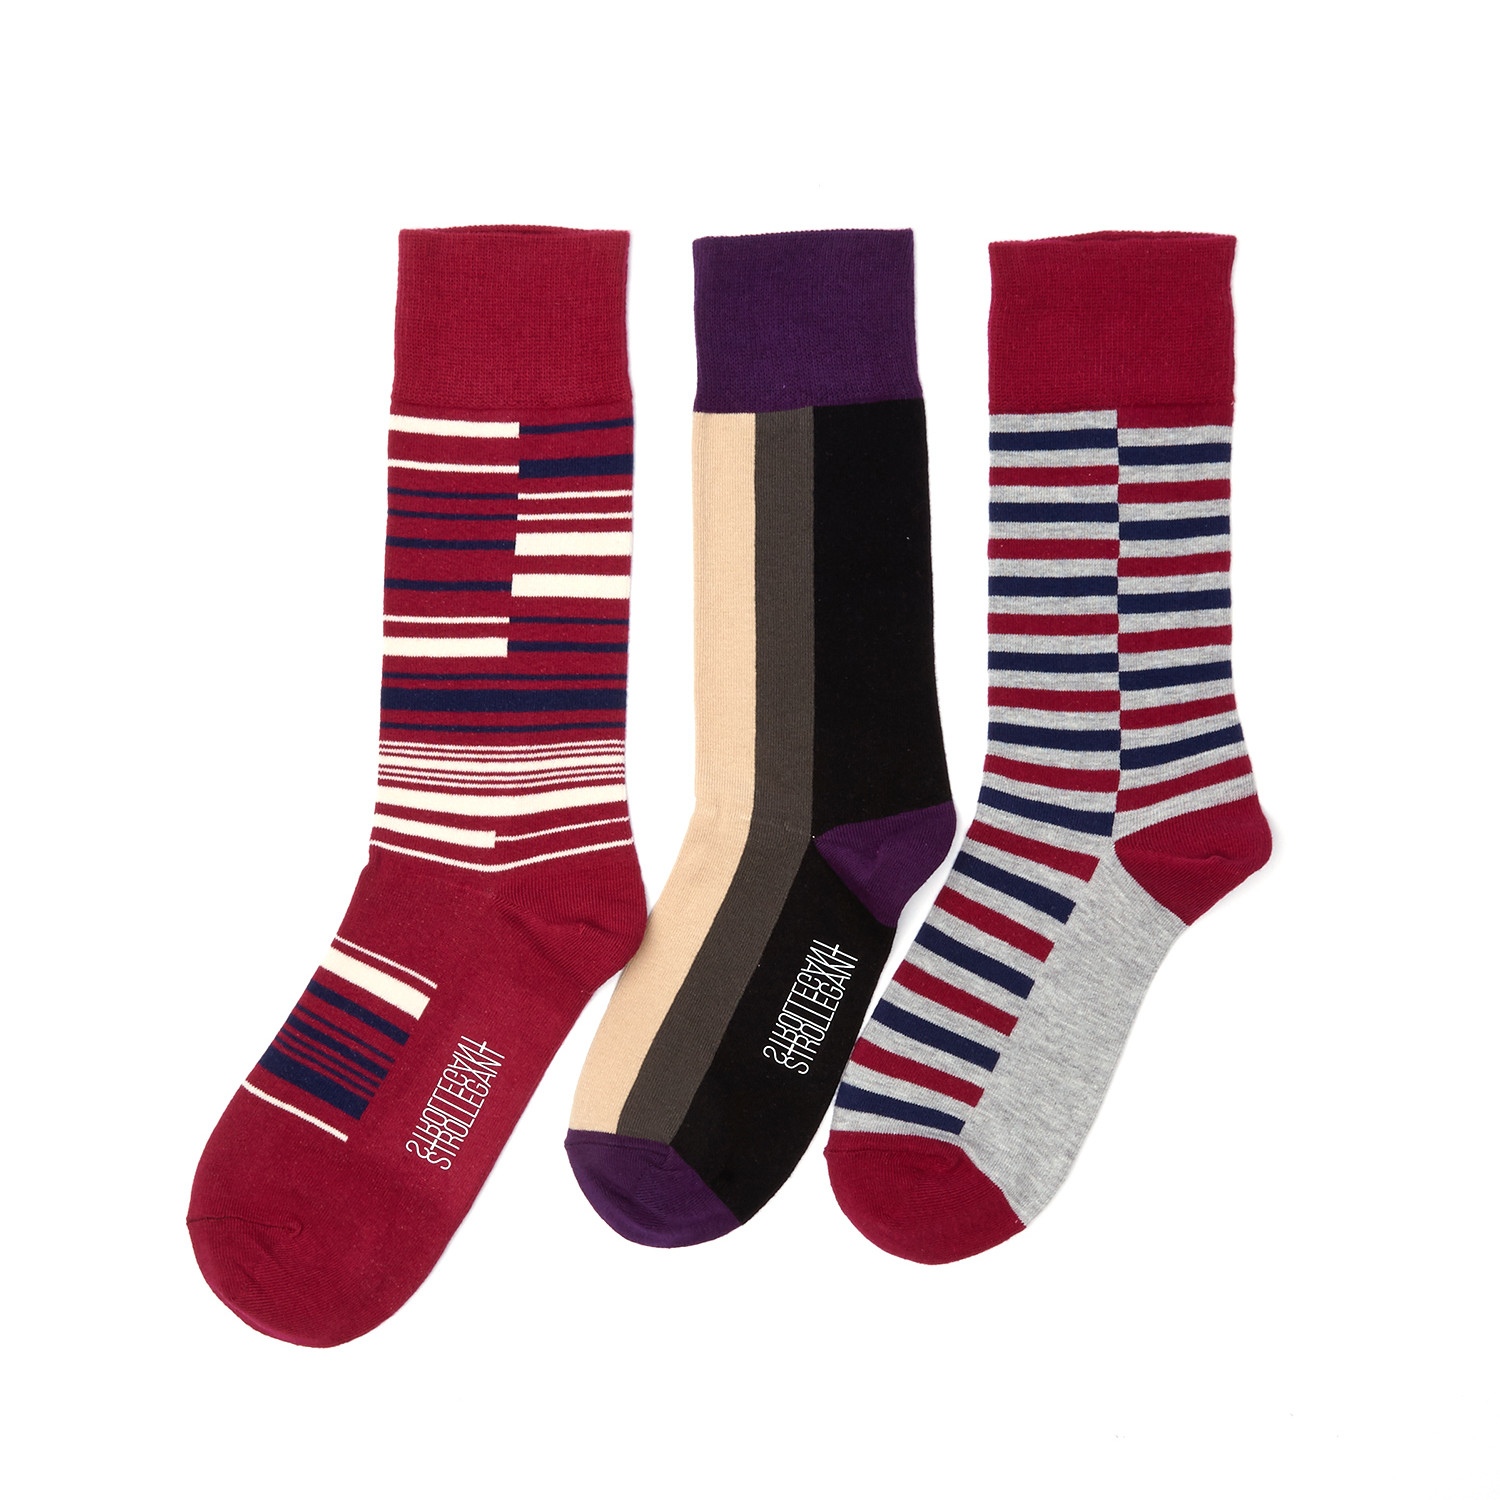 Top Brass Executive Socks // Pack of 3 - Strollegant Socks - Touch of ...